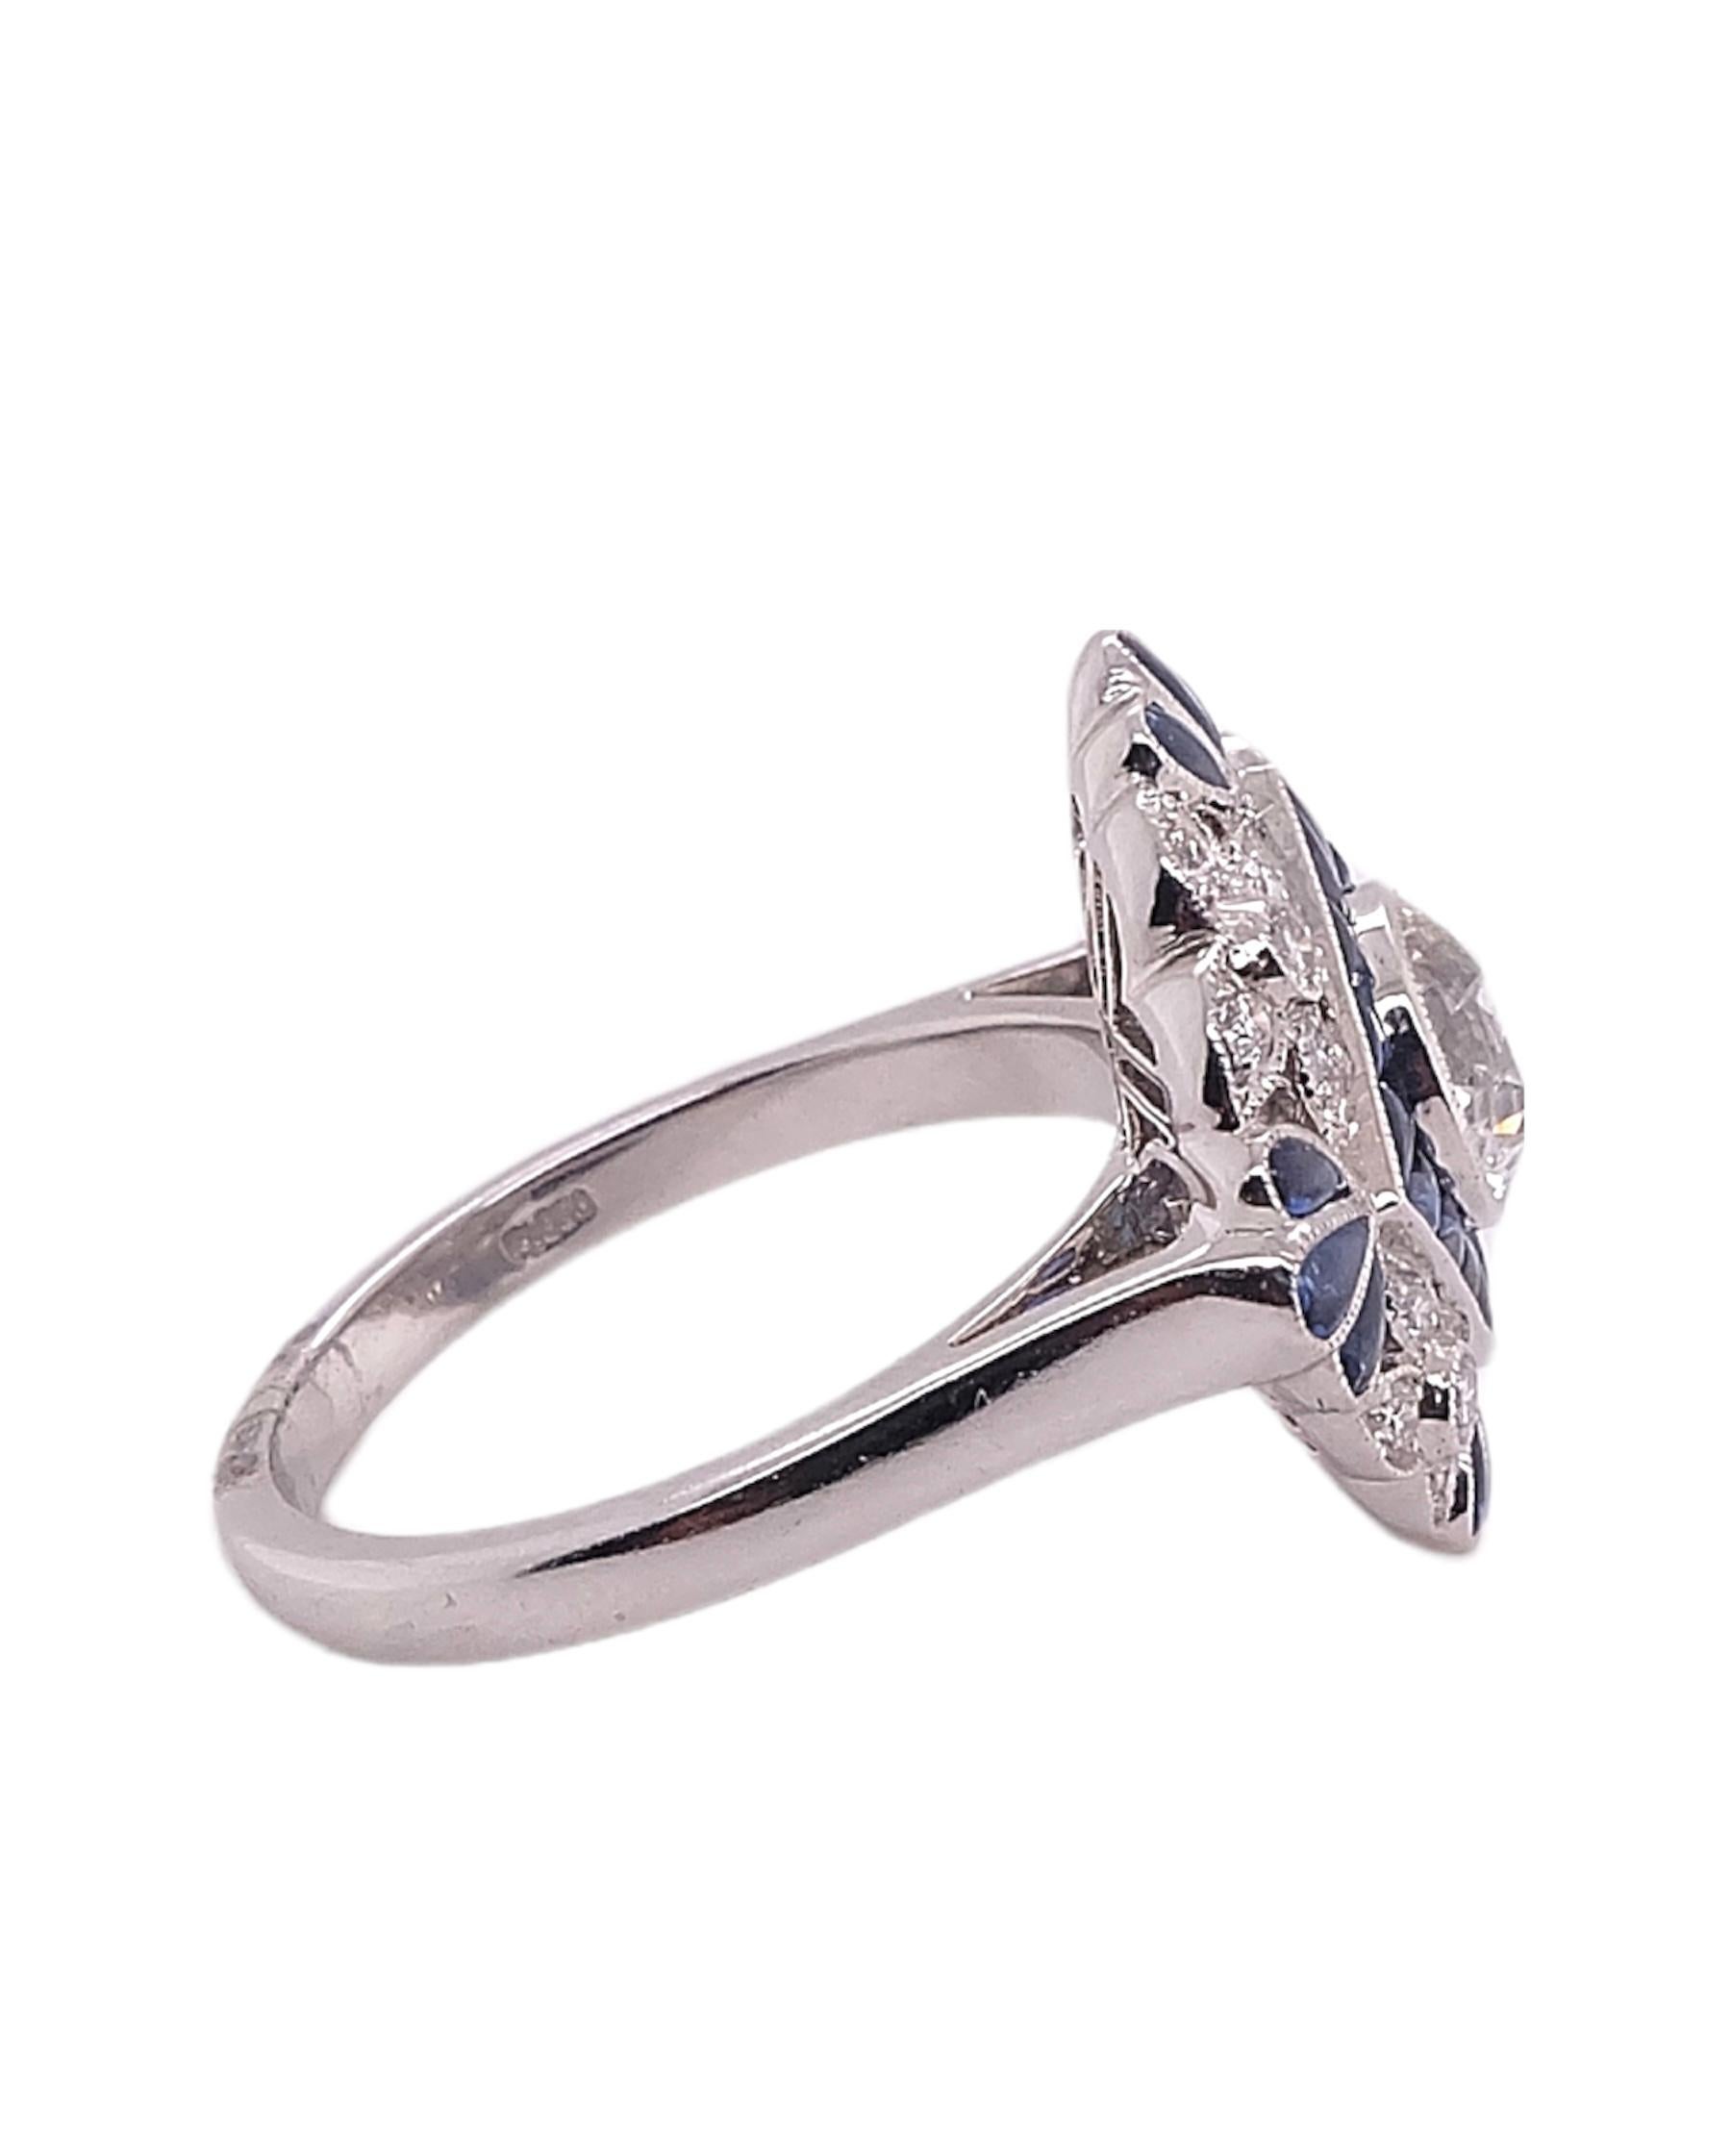 Art Deco style ring that is set in platinum. The ring features a round cut center diamond that weighs 0.93 carat complemented with blue sapphires that weigh 0.95 carats and small diamonds that weigh 0.25 carats.

Sophia D by Joseph Dardashti LTD has